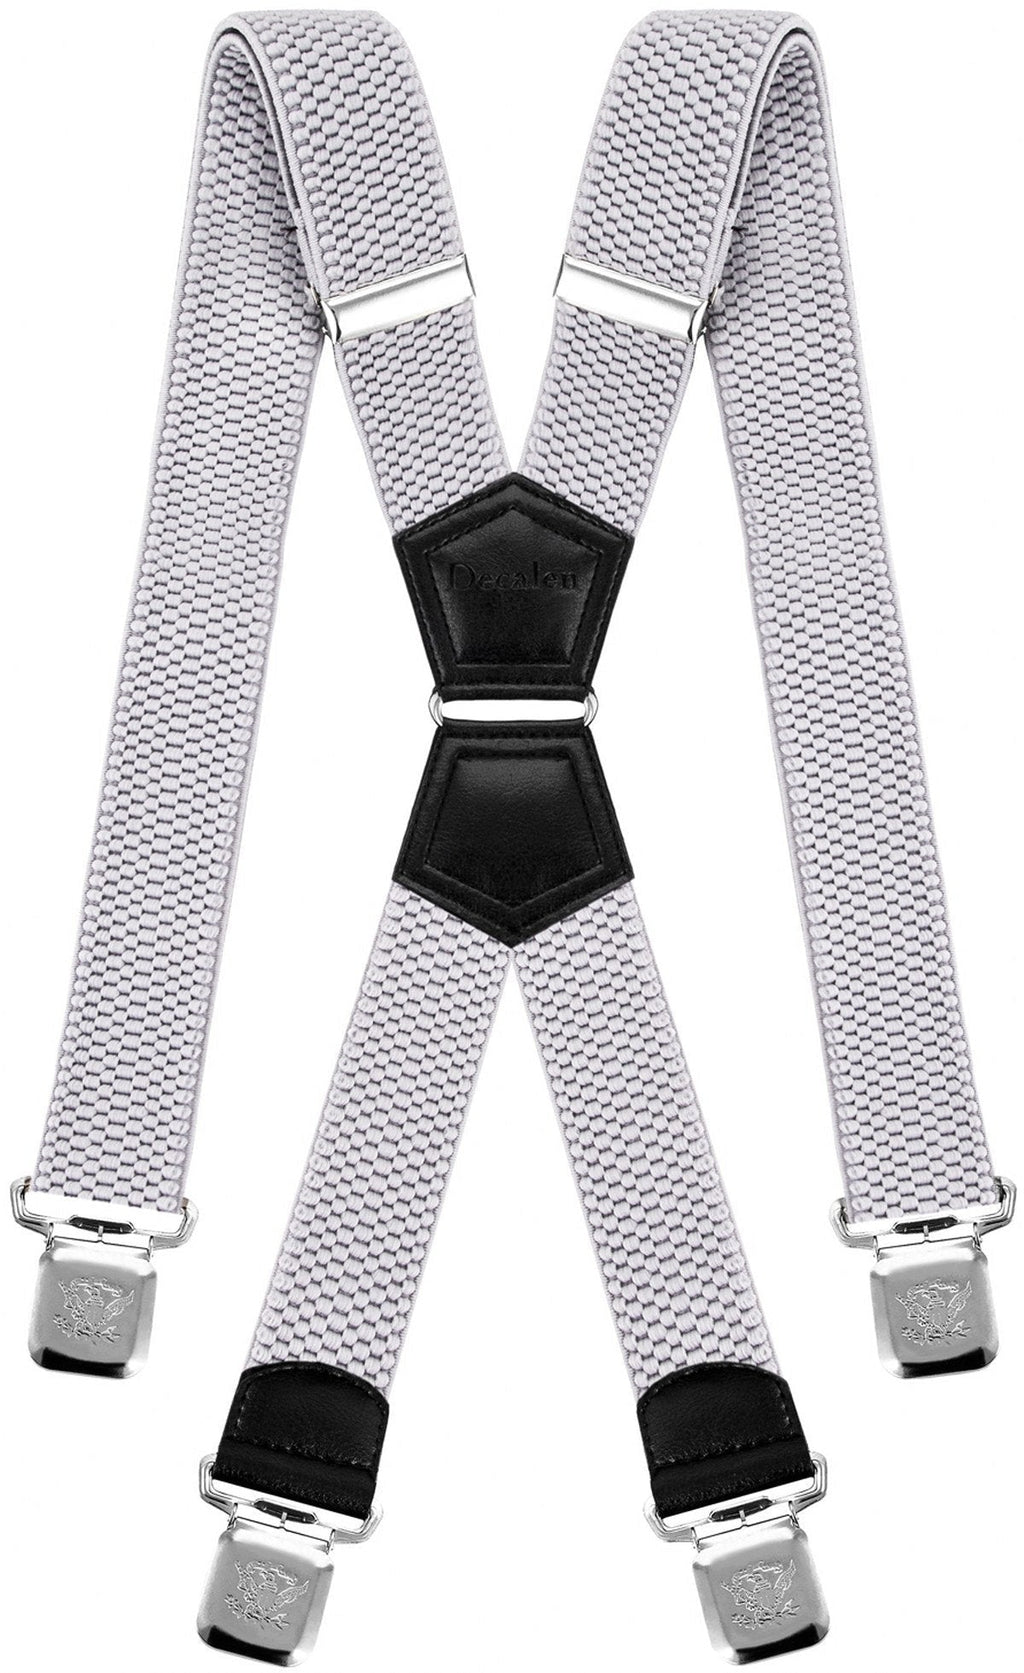 [Australia] - Mens Suspenders X Style Very Strong Clips Adjustable One Size Fits All Heavy Duty Braces Baby Blue 